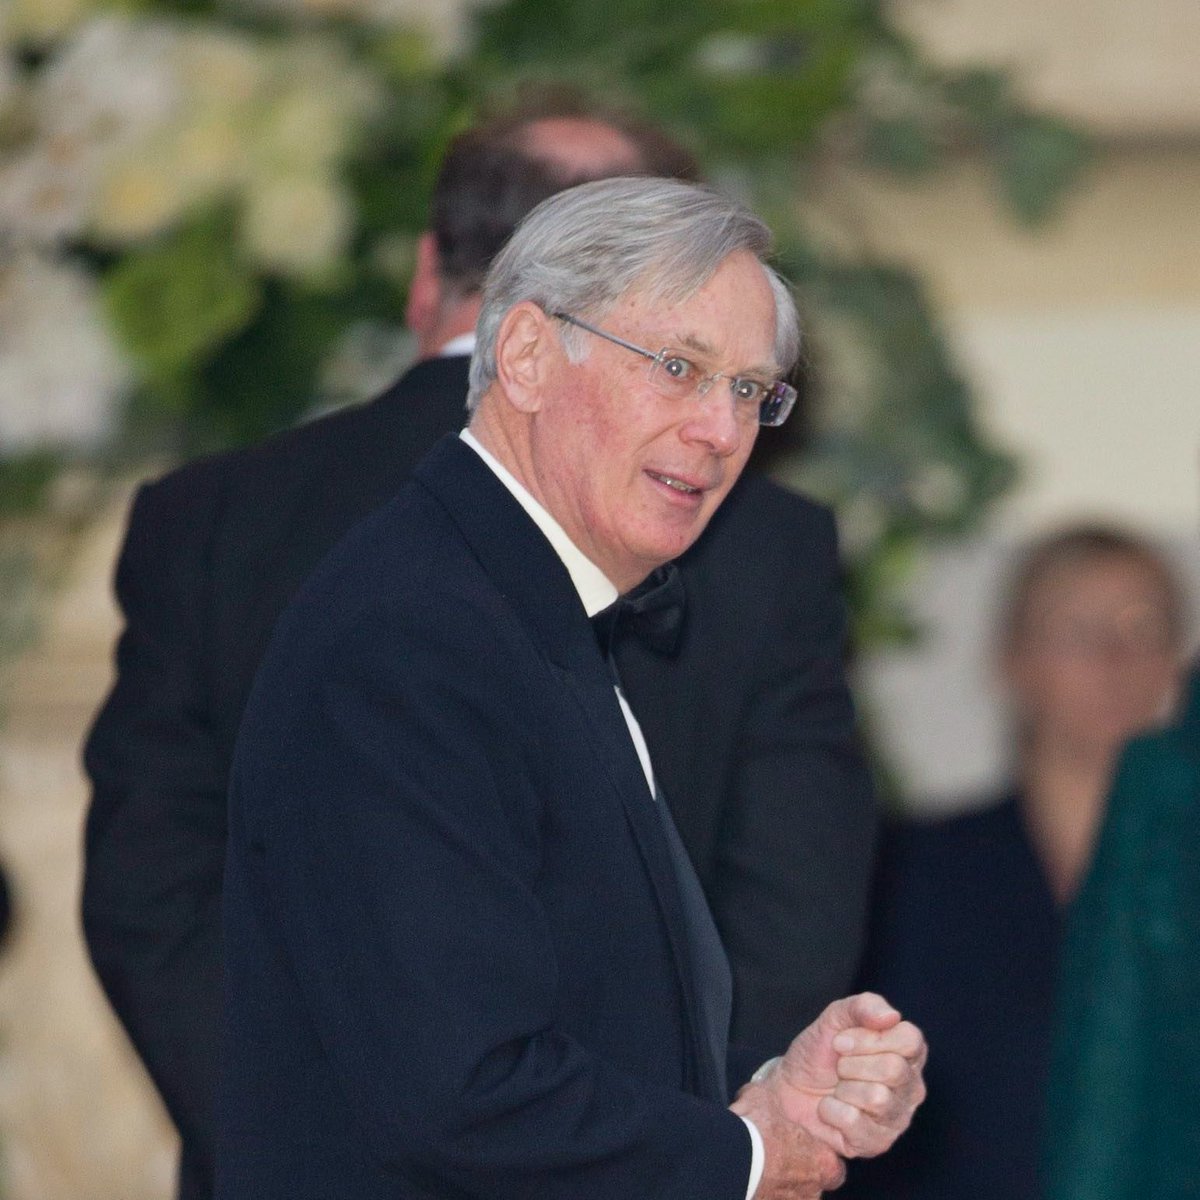 He is a Prince and the Duke of Gloucester. Married to Birgitte (next thread is about her). Richard ALWAYS supported his whole family, he supports more than 170 charities. One topic he loves to work on is conservation, as he graduated in architecture, before becoming